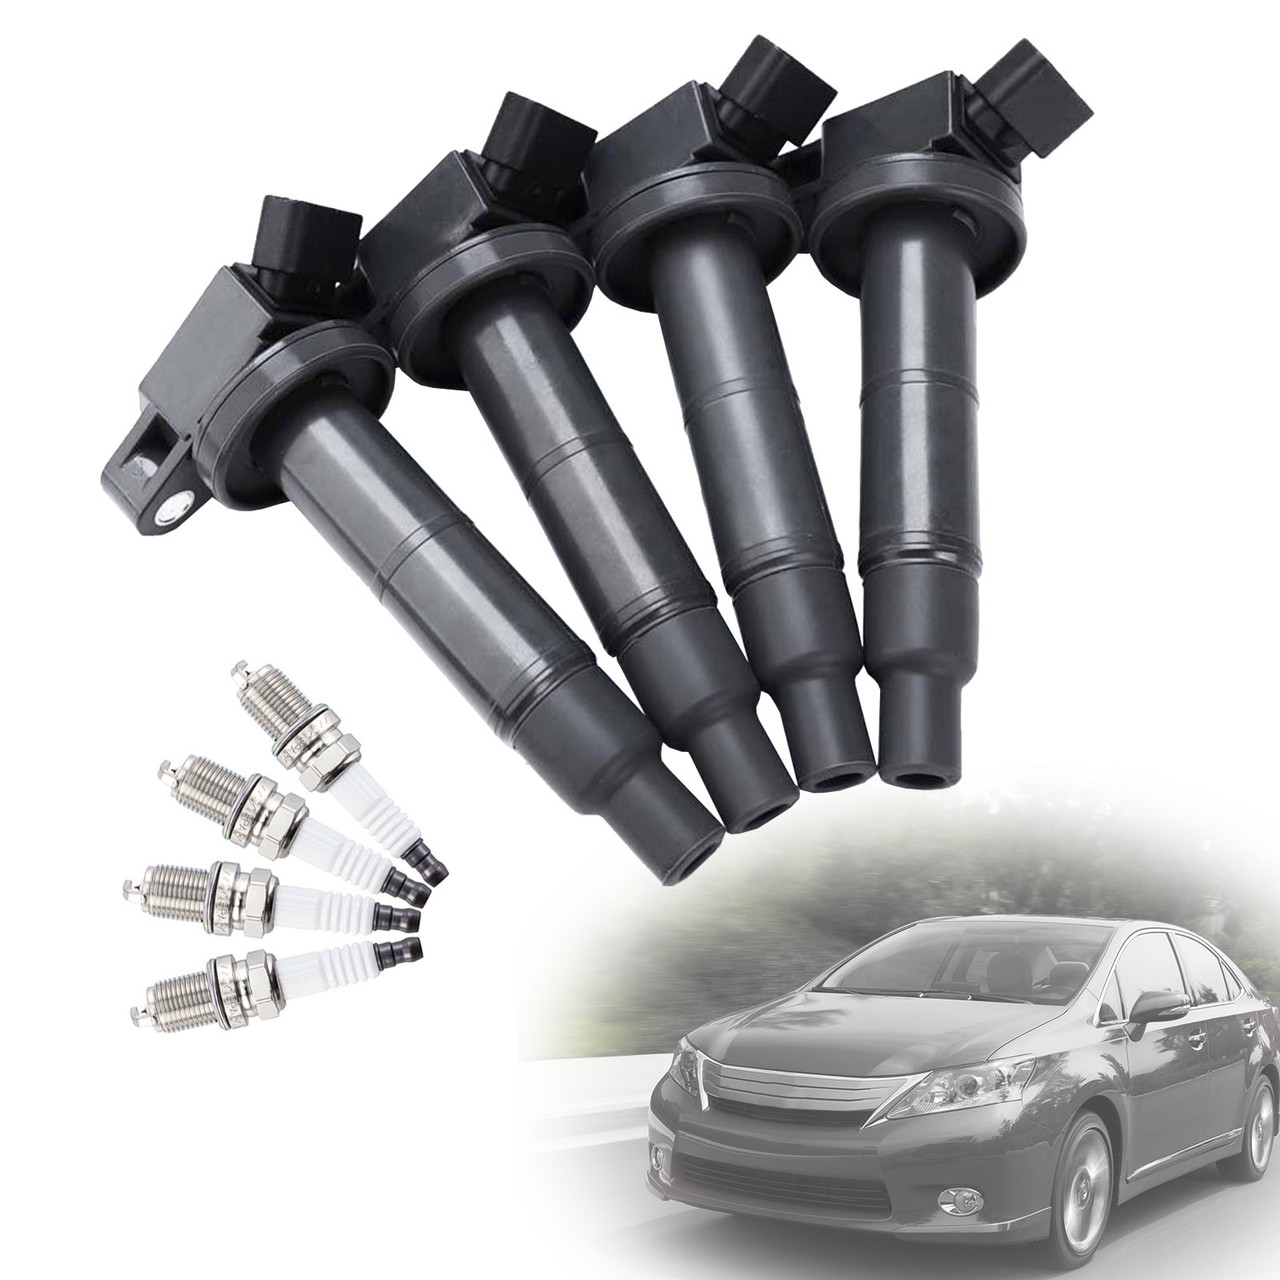 4x Ignition Coil+Spark Plug UF333 UF494 For Toyota Camry 2.4L 2002-2011